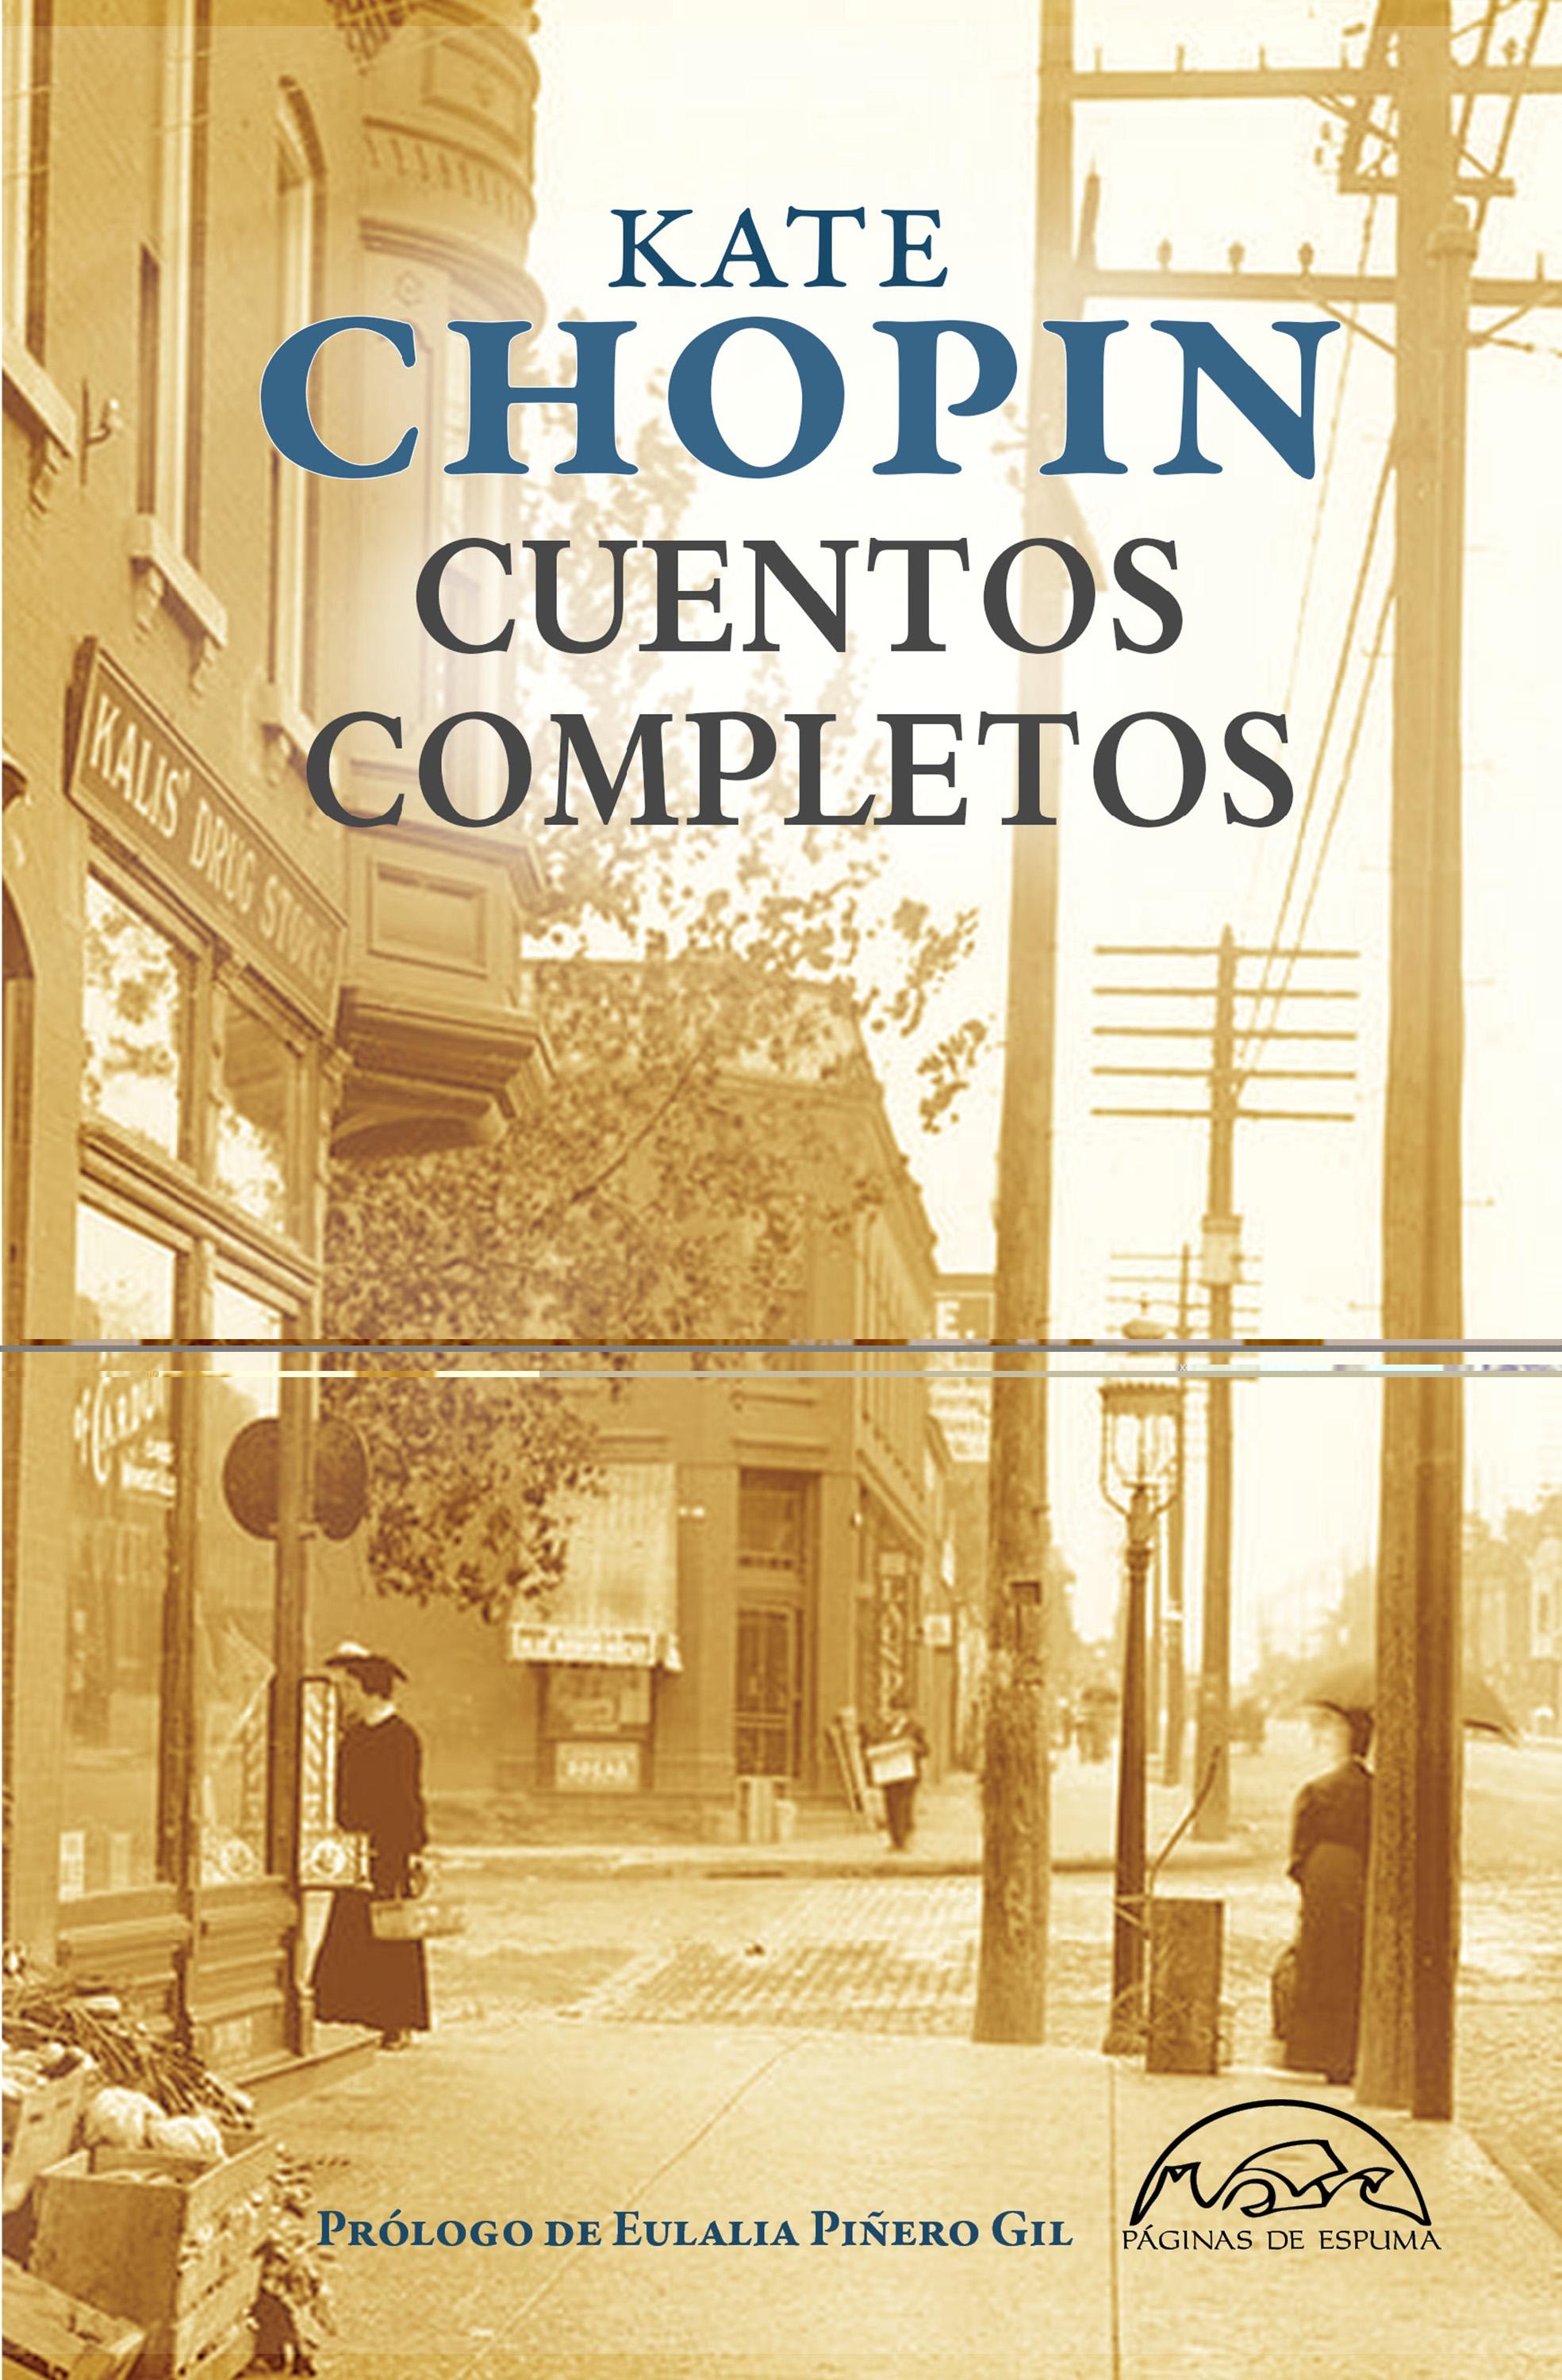 Cuentos completos "(Kate Chopin)"